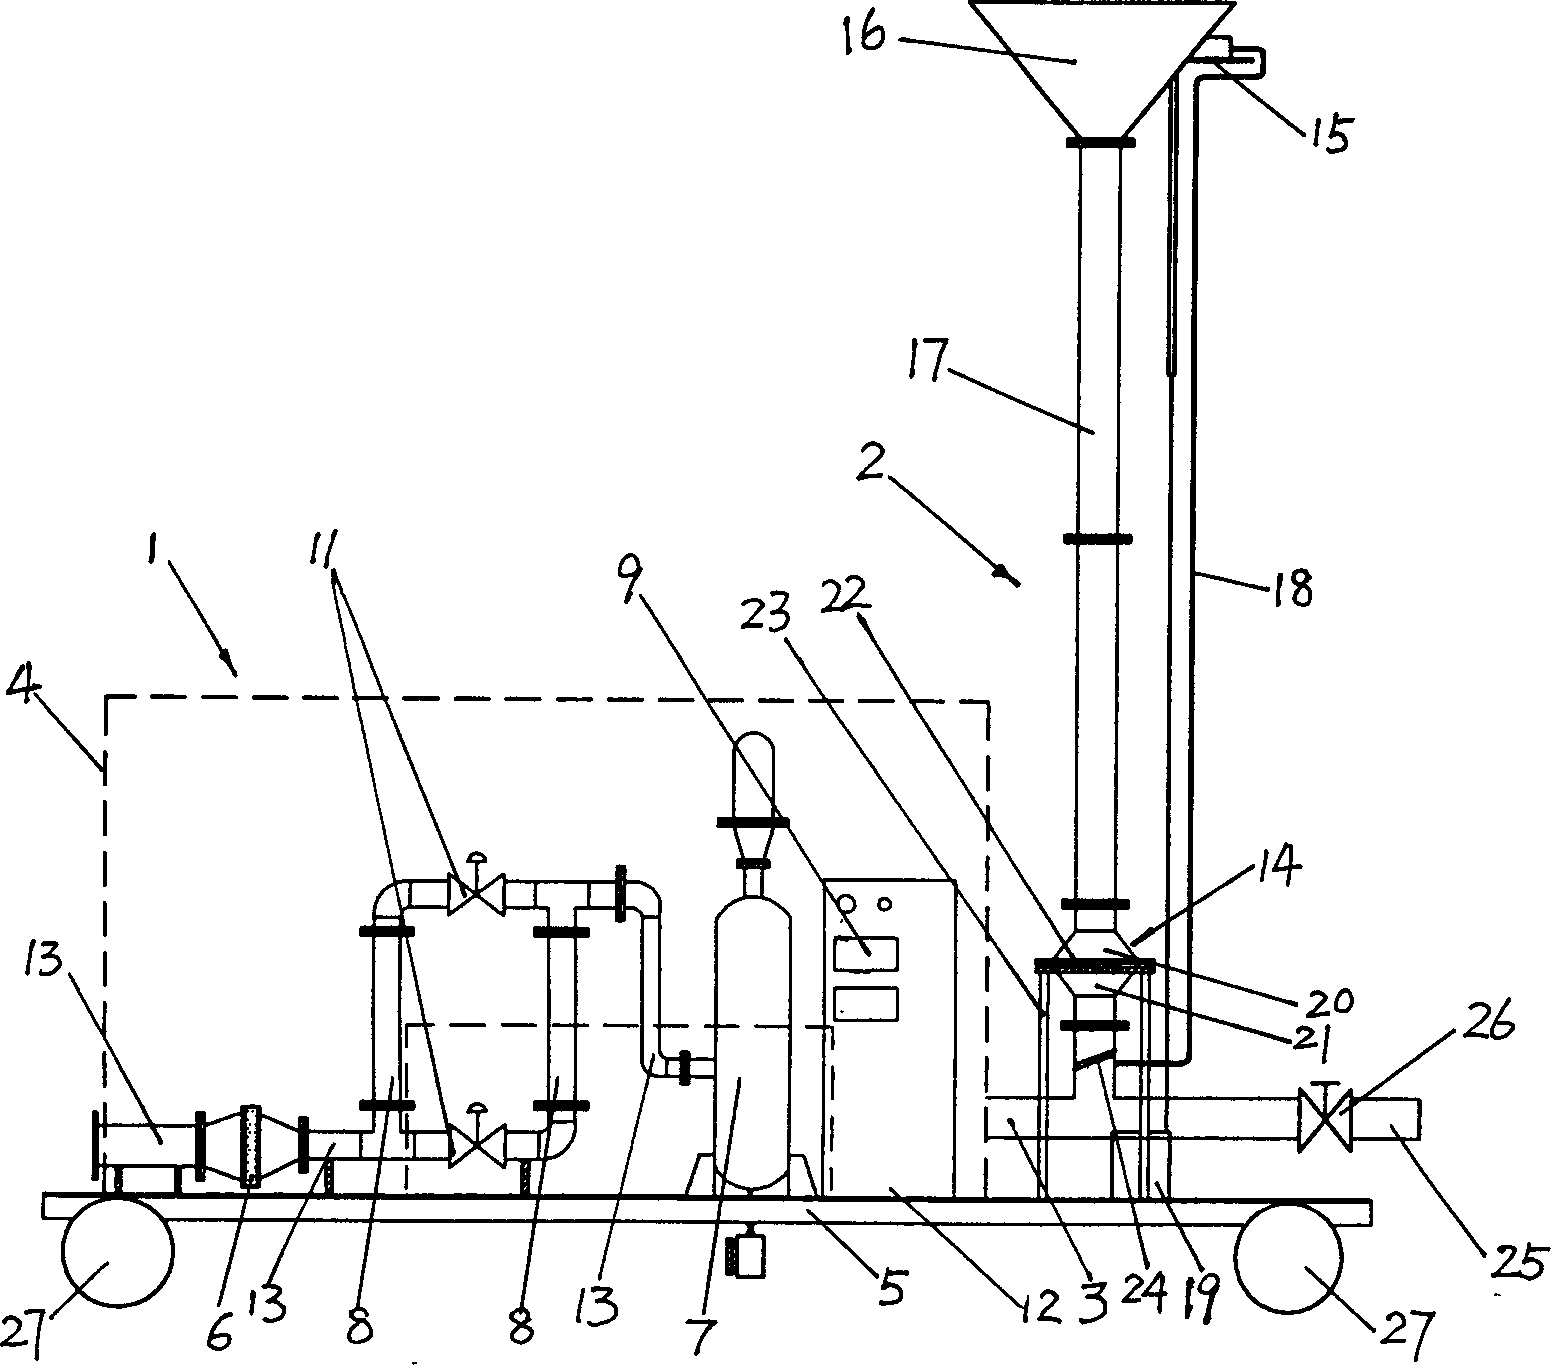 Garbage filling and burying gas test and torch device